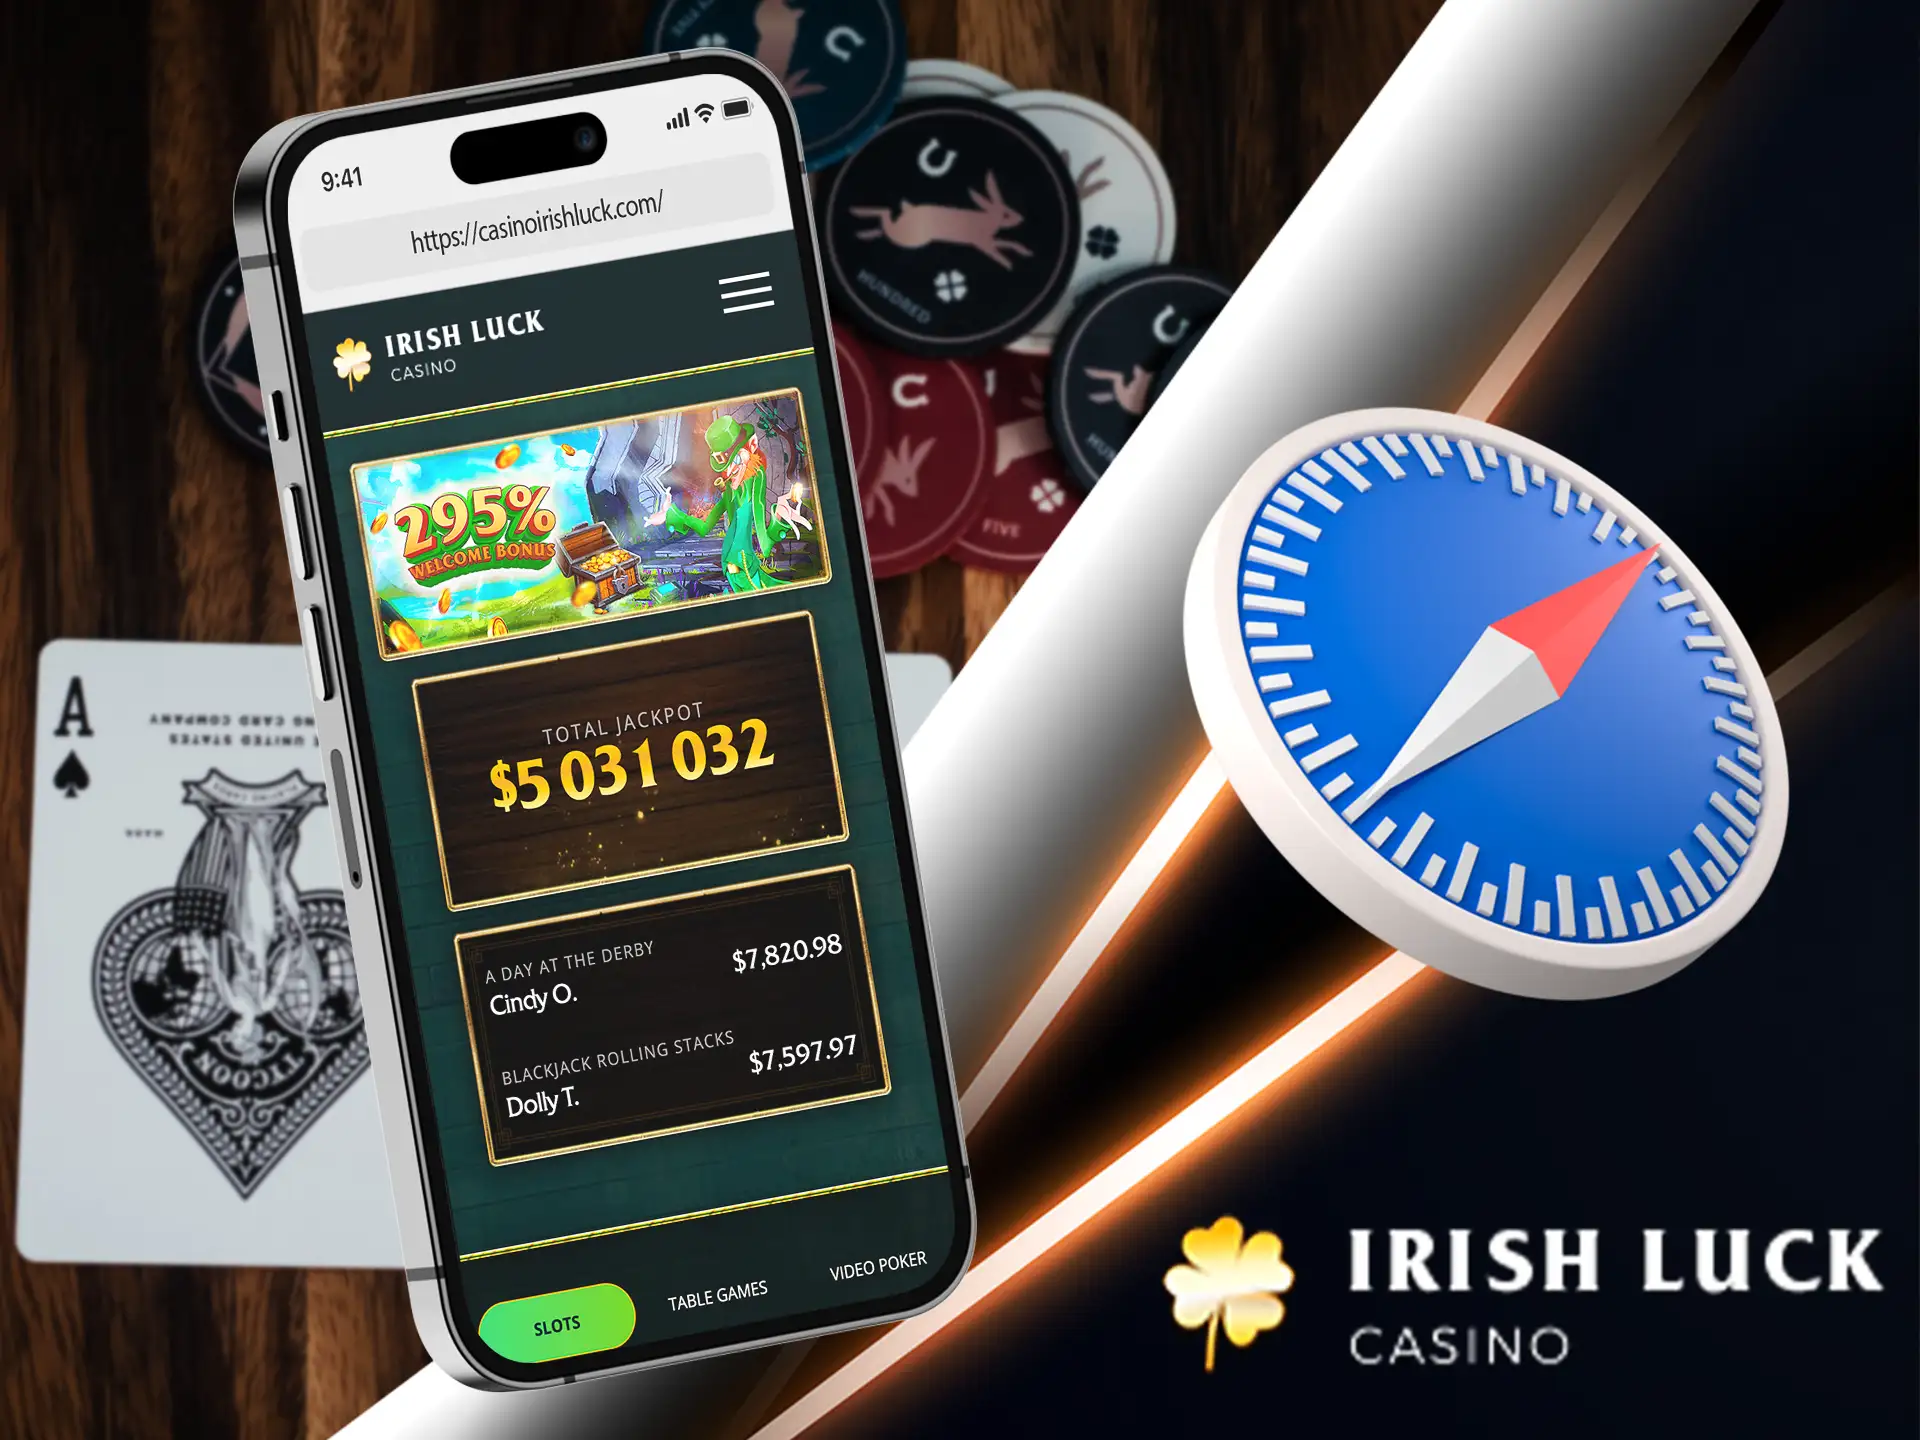 If your smartphone is not compatible with the application - this option from Irish Luck will help you enjoy the game.